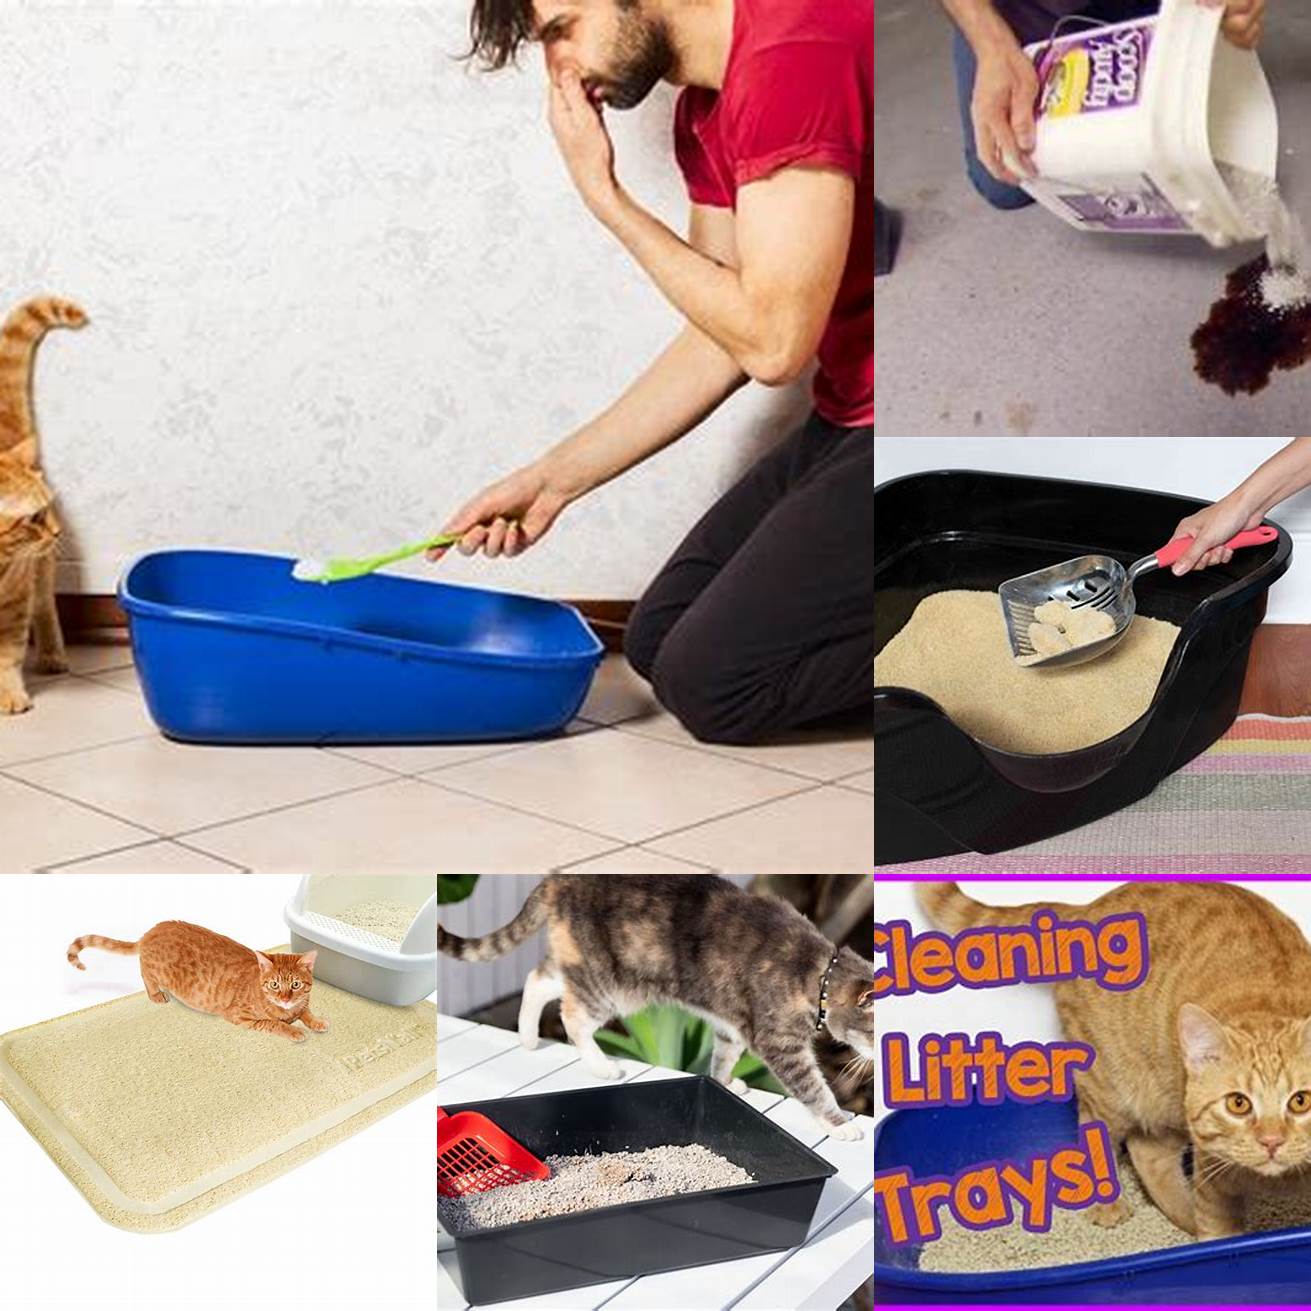 Cleanup Cat litter can be used to absorb the oil that has already spilled